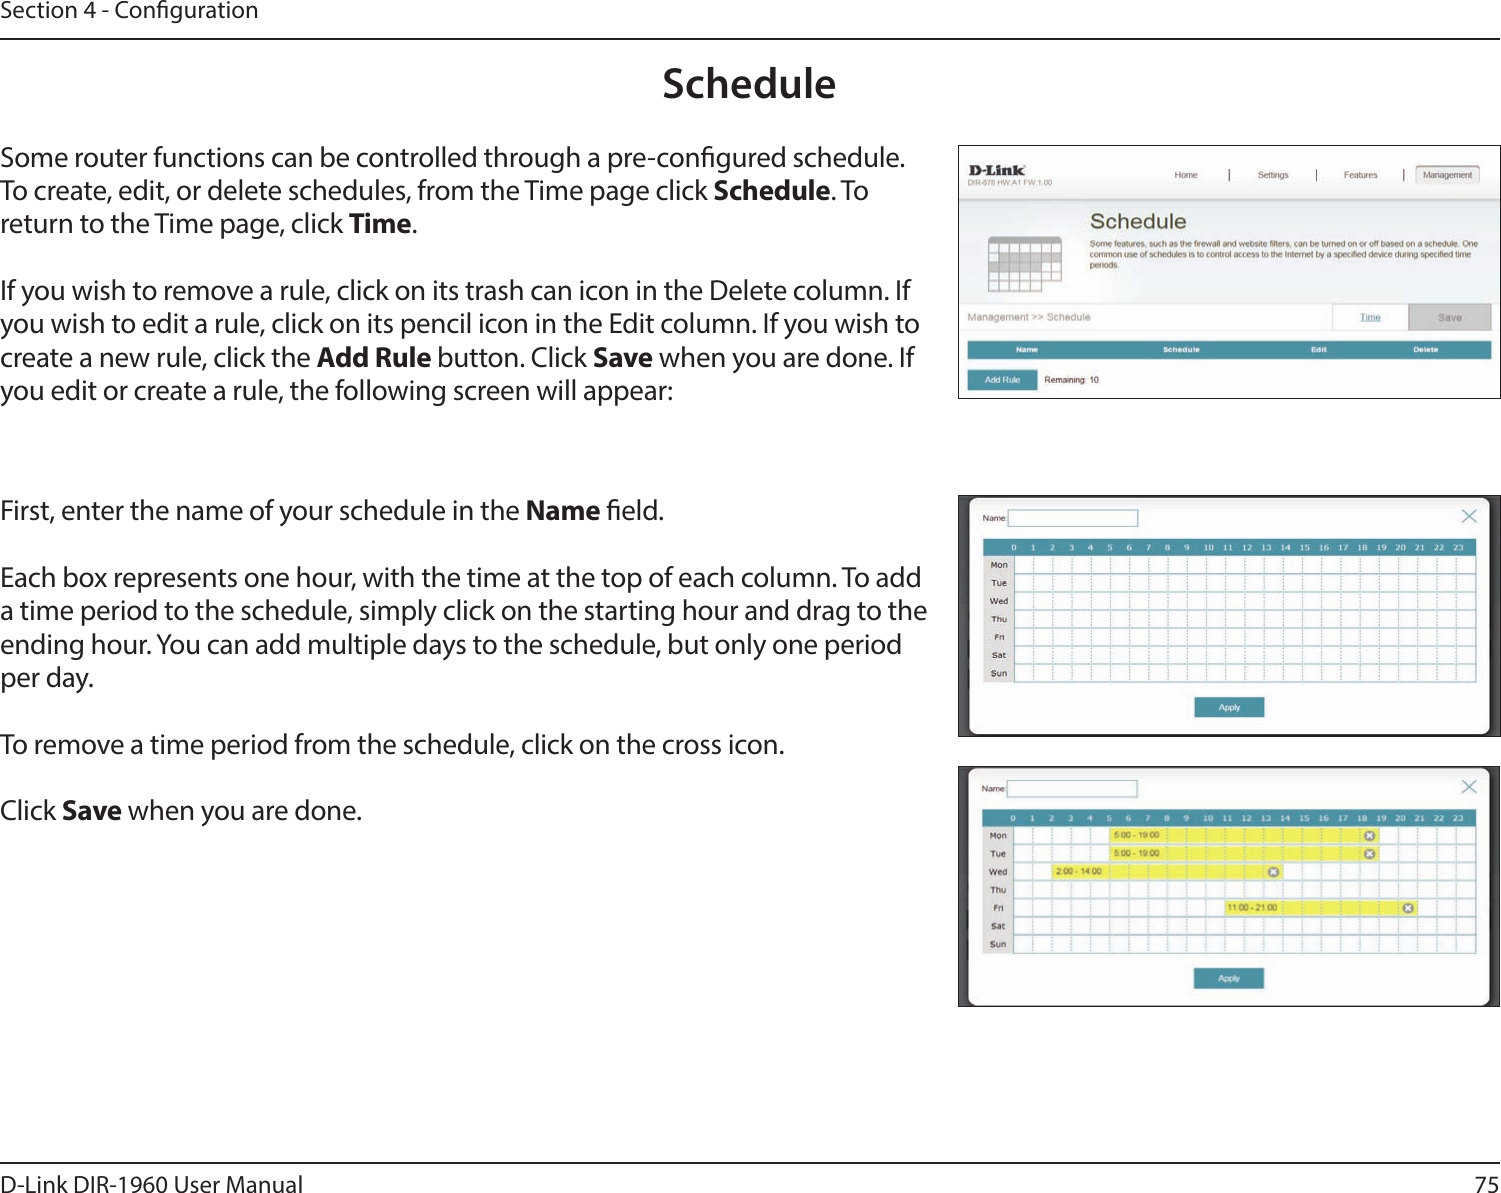 75D-Link DIR-1960 User ManualSection 4 - CongurationScheduleSome router functions can be controlled through a pre-congured schedule. To create, edit, or delete schedules, from the Time page click Schedule. To return to the Time page, click Time. If you wish to remove a rule, click on its trash can icon in the Delete column. If you wish to edit a rule, click on its pencil icon in the Edit column. If you wish to create a new rule, click the Add Rule button. Click Save when you are done. If you edit or create a rule, the following screen will appear:First, enter the name of your schedule in the Name eld.Each box represents one hour, with the time at the top of each column. To add a time period to the schedule, simply click on the starting hour and drag to the ending hour. You can add multiple days to the schedule, but only one period per day.To remove a time period from the schedule, click on the cross icon.Click Save when you are done.